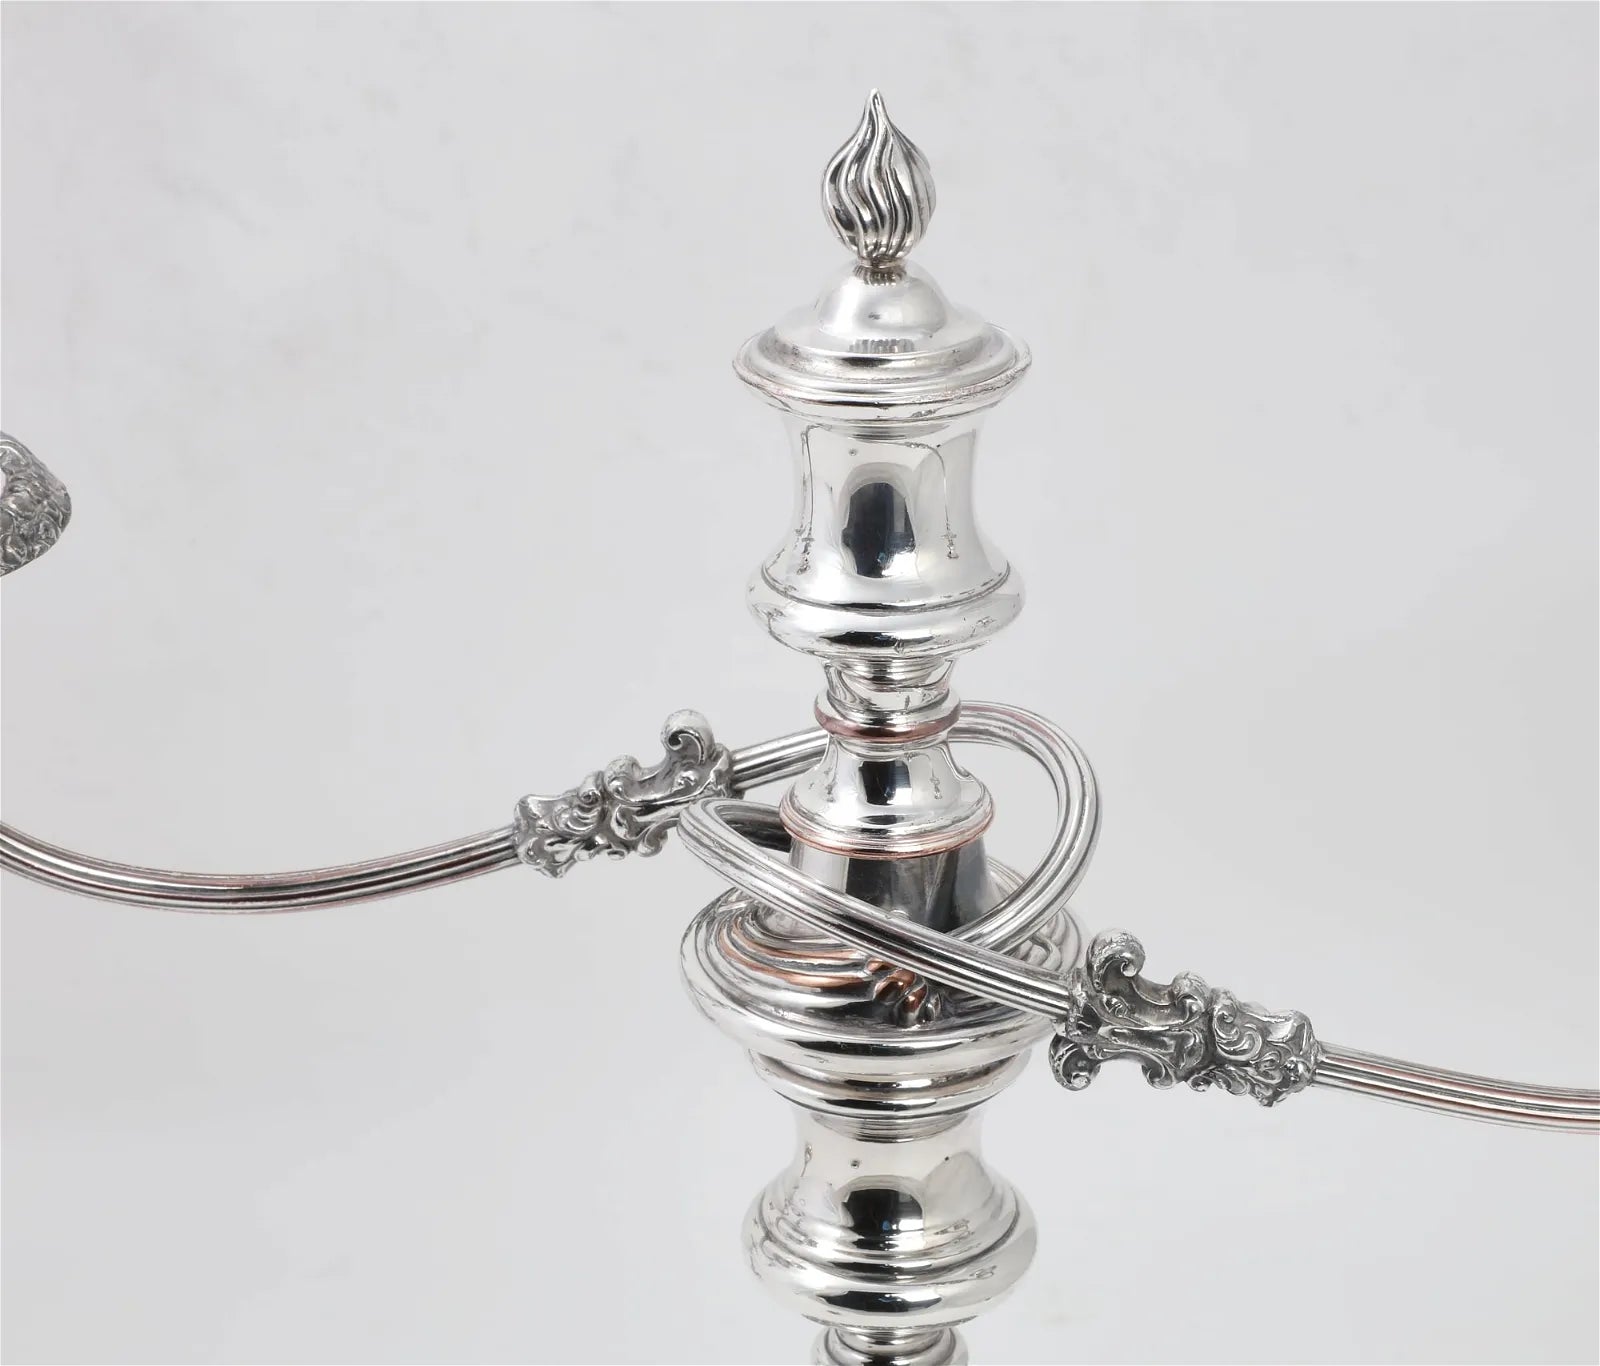 DA2-022: PAIR OF LATE 19TH CENTURY ENGLISH SILVER PLATE CONVERTIBLE THREE LIGHT CANDLEABRA